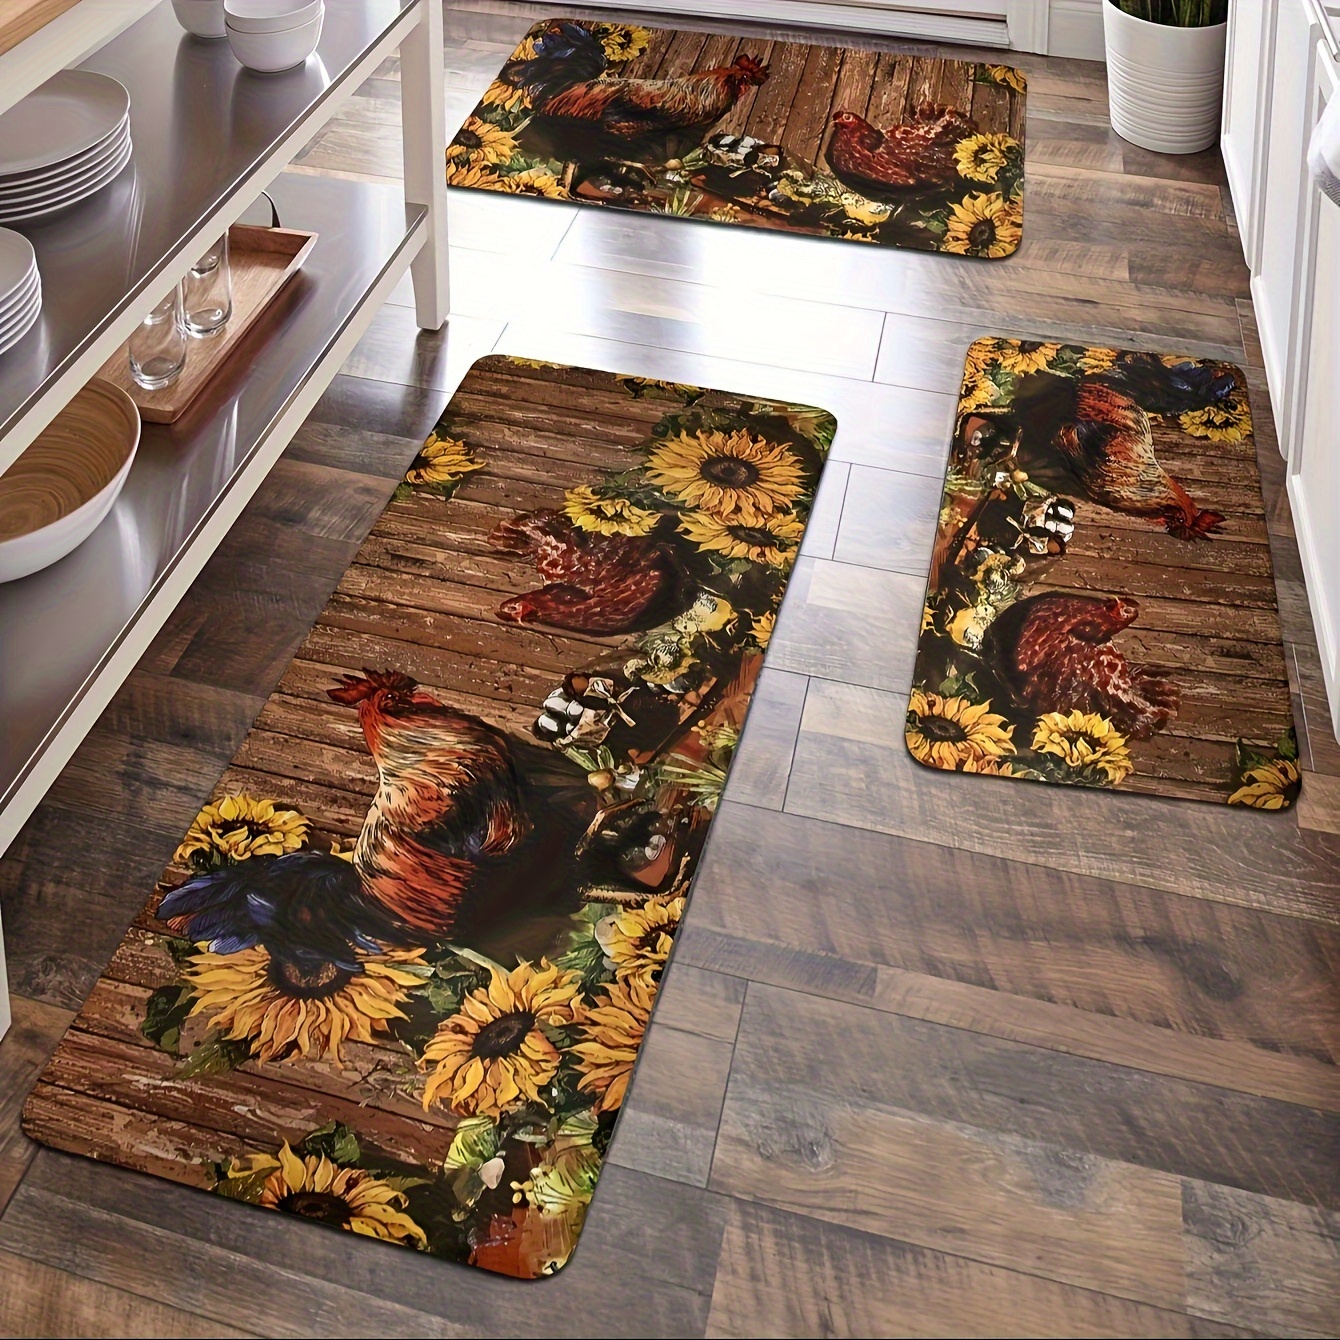 

Rooster Design Non-slip Kitchen Rugs Set - 3 Piece Polyester Flannel Anti-slip Absorbent Mats, Machine Washable, Rectangle Floor Carpets For Home, Bathroom, Laundry - 40x60, 50x80, 40x120cm